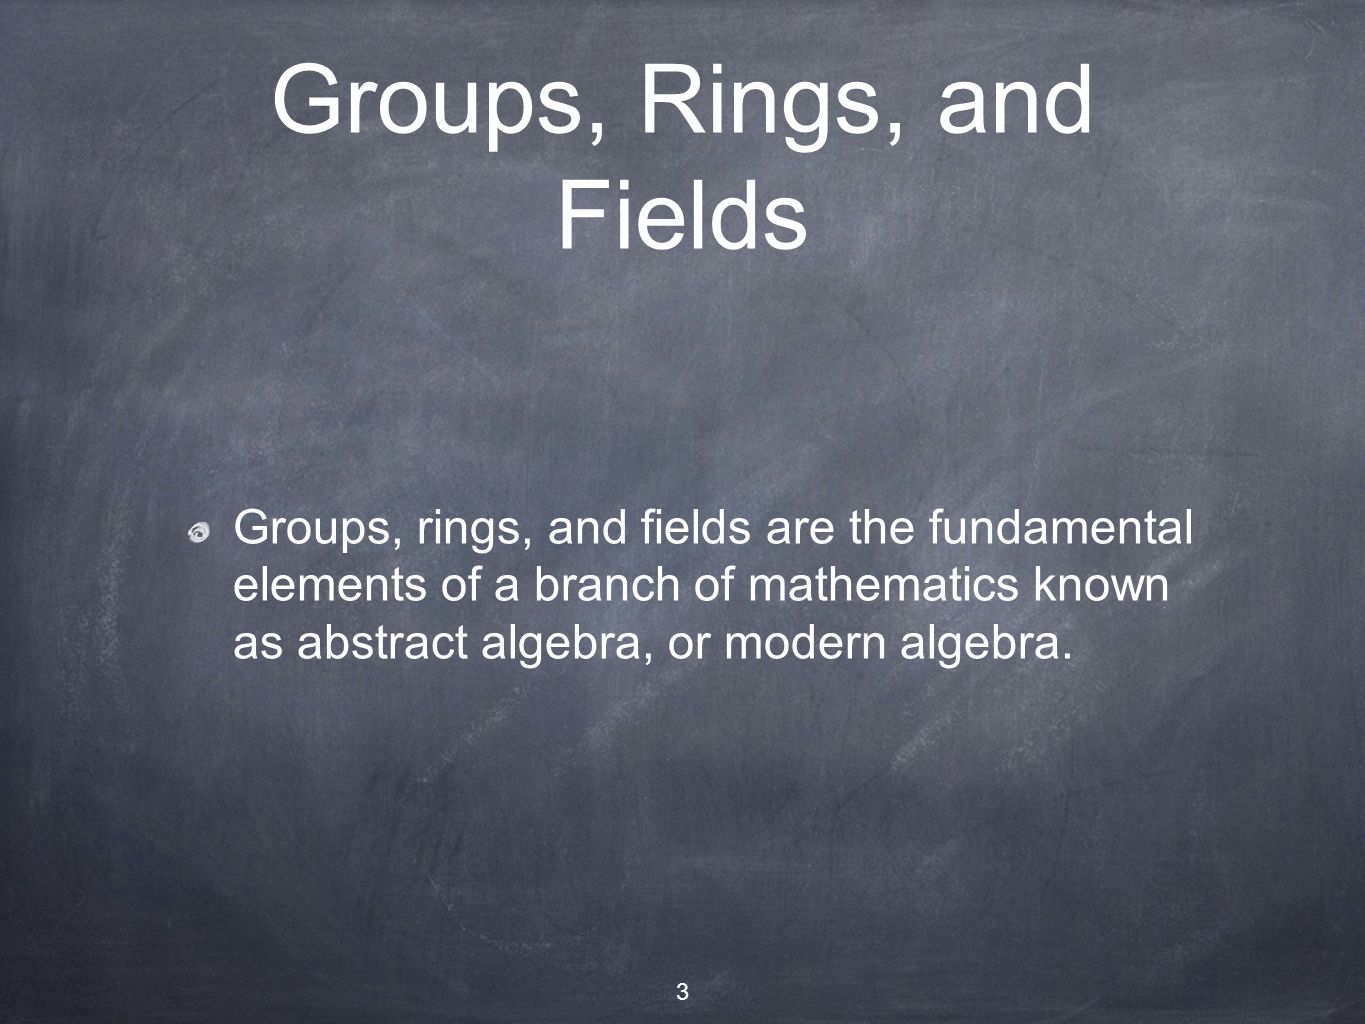 FINITE FIELDS 7/30 陳柏誠. - ppt video online download